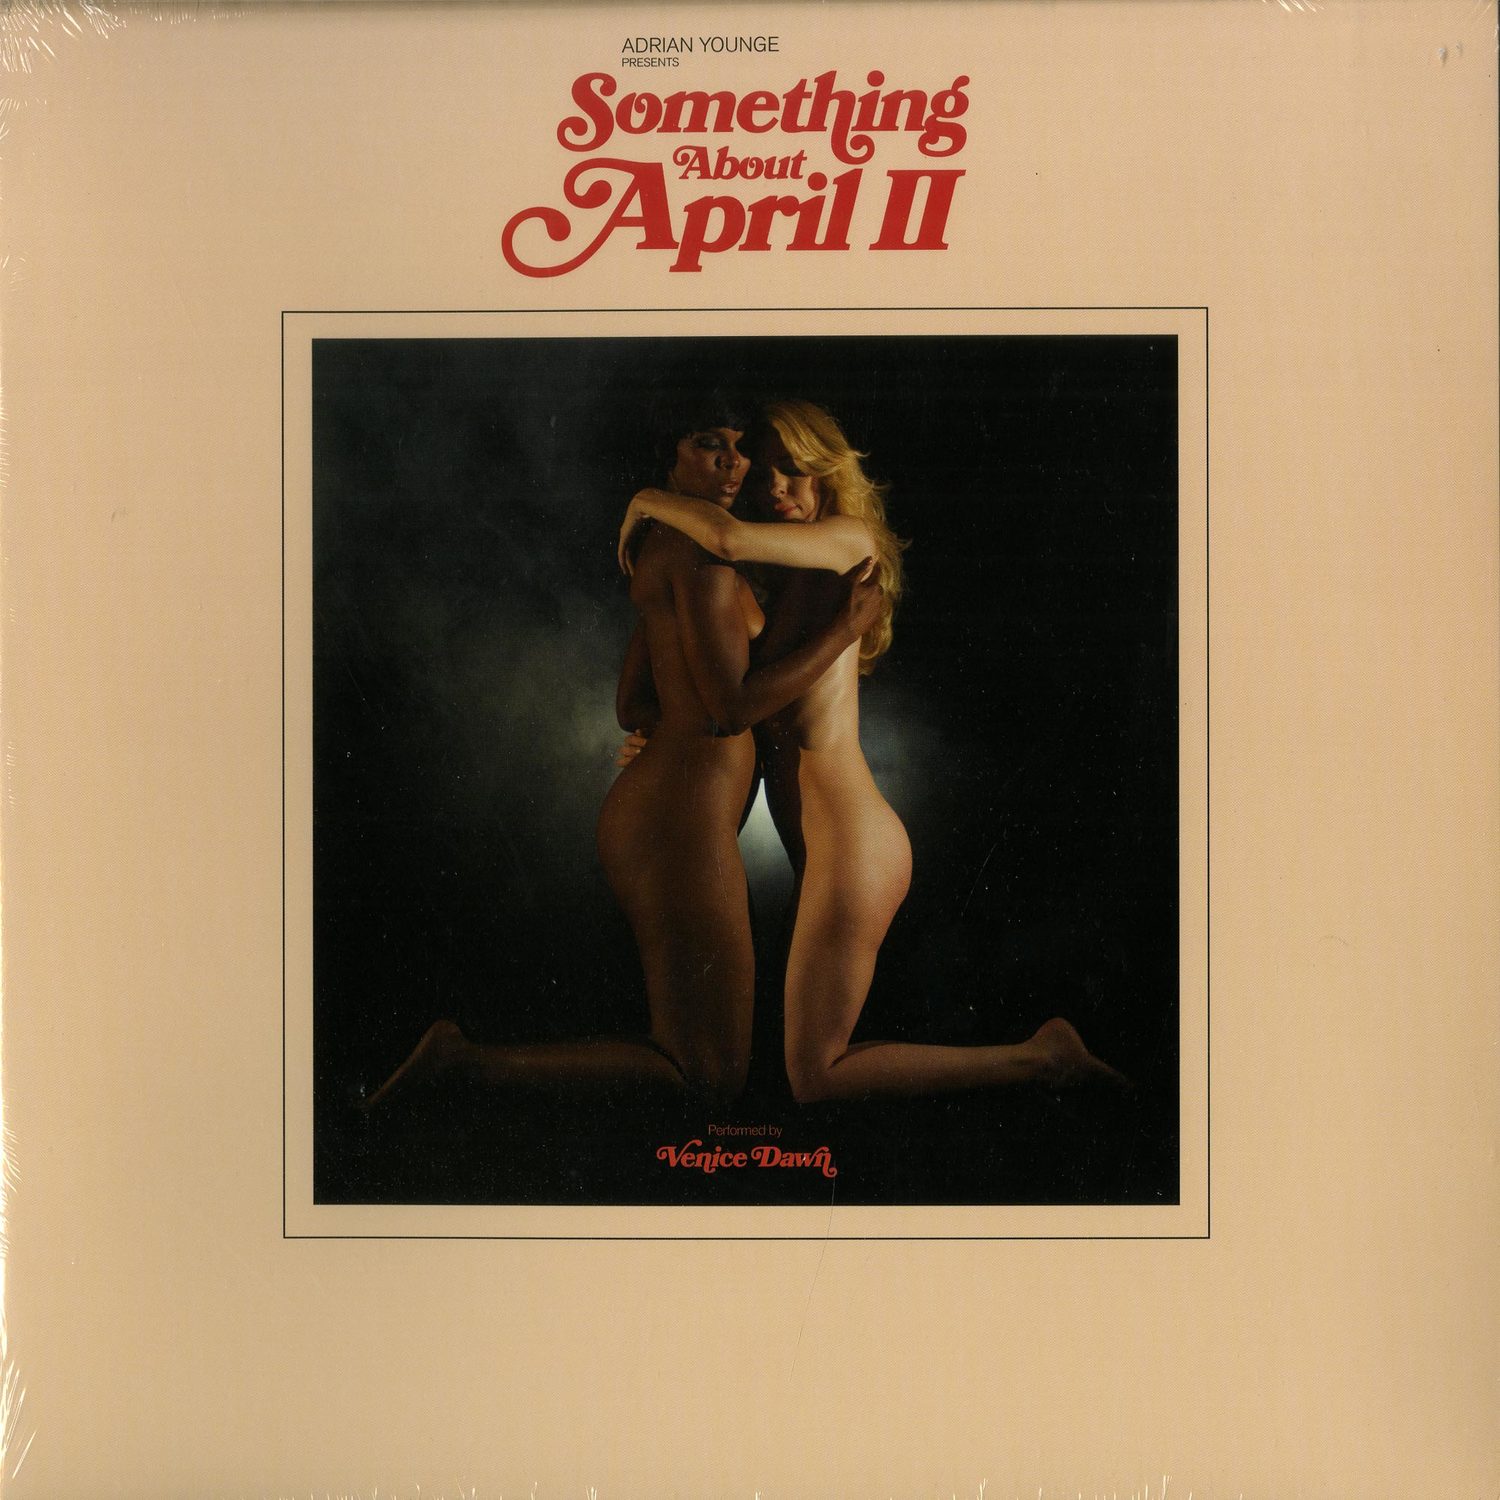 Adrian Younge pres. Venice Dawn - SOMETHING ABOUT APRIL II 